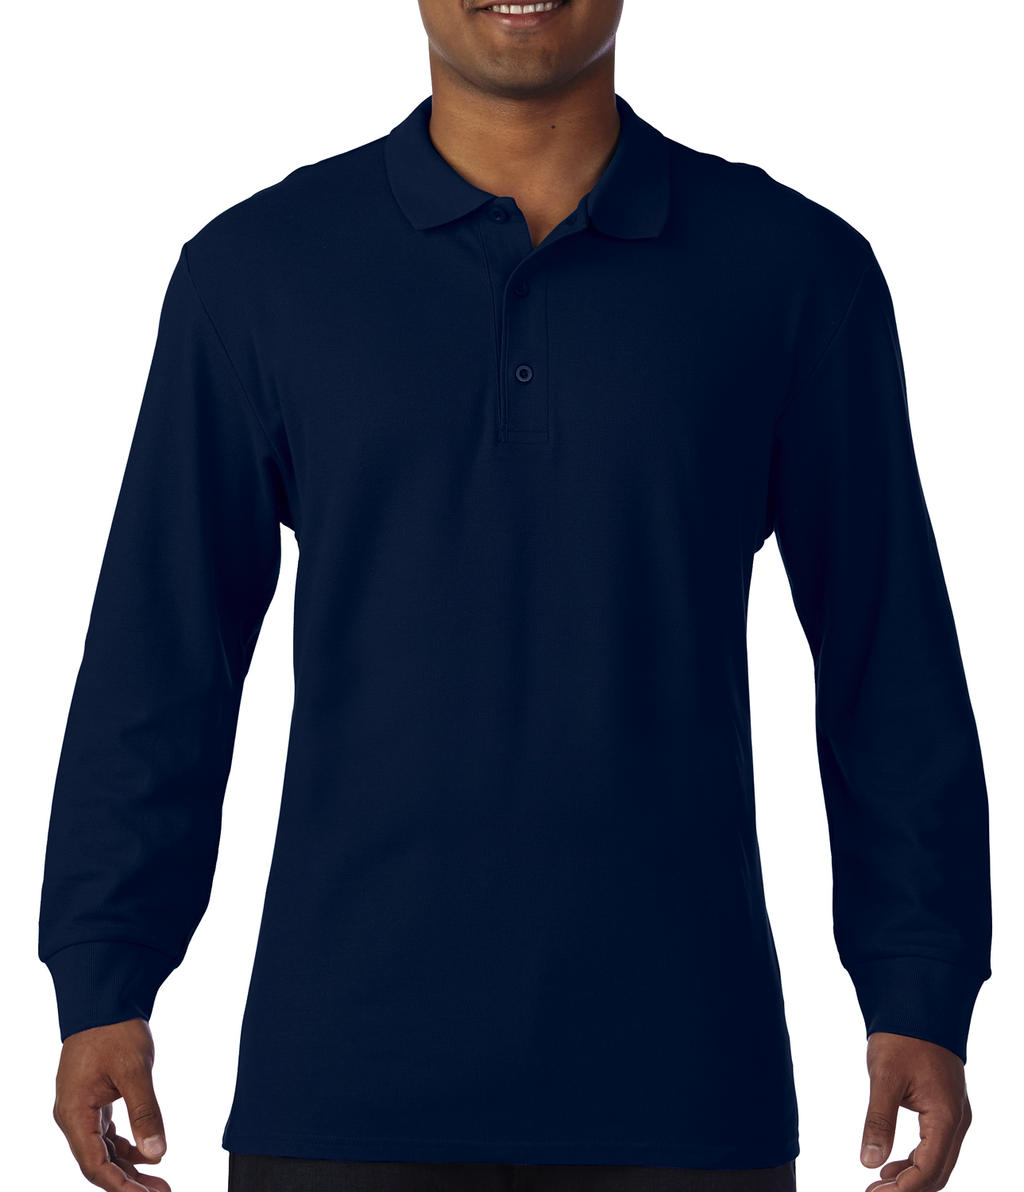  Premium Cotton Adult Double Piqu? Polo LS in Farbe Navy